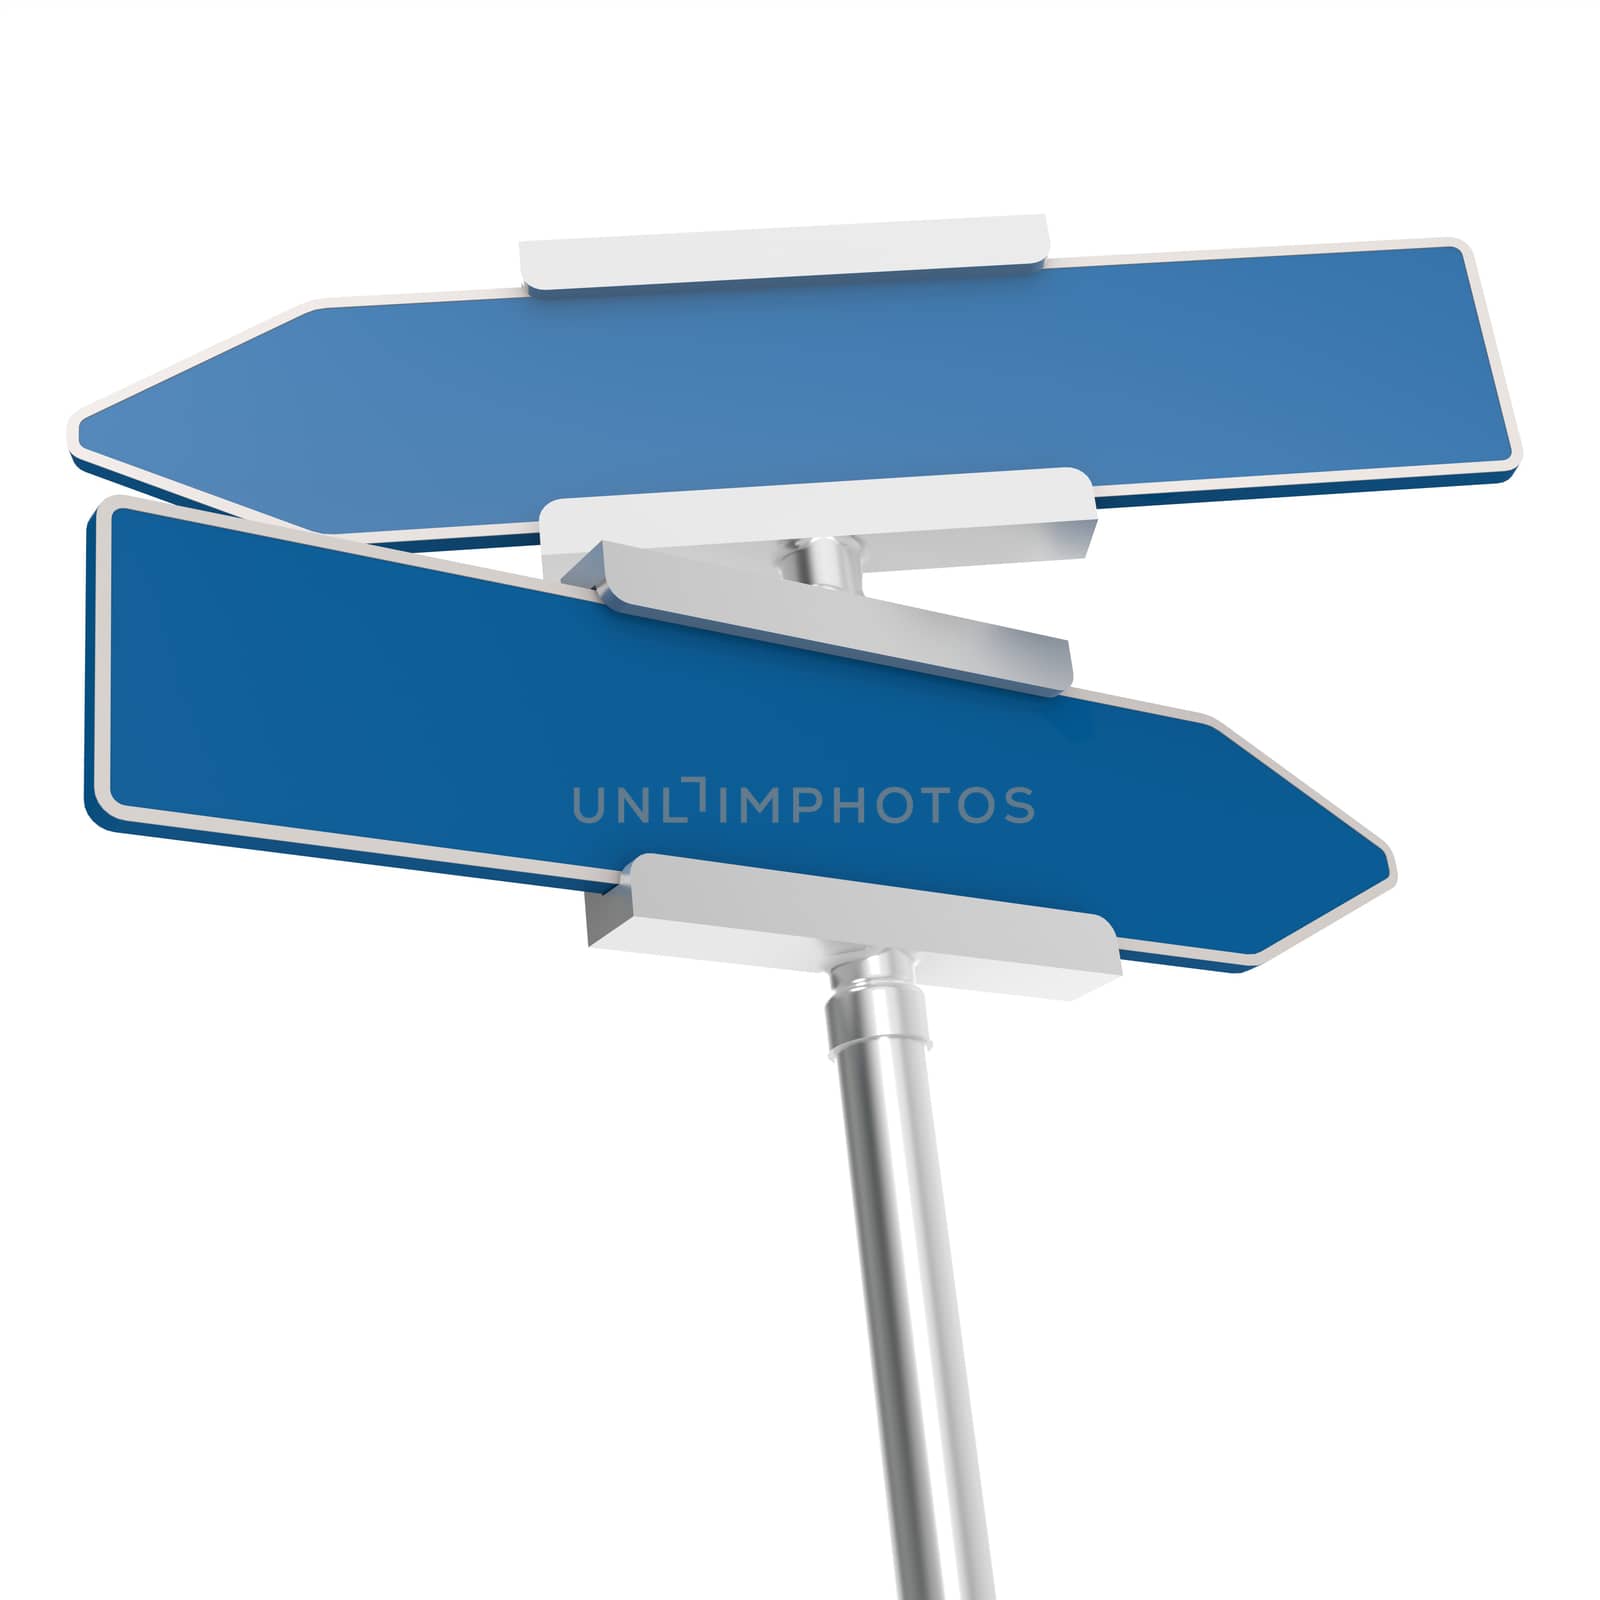 Blue signboard with metal pole, isolated with white background